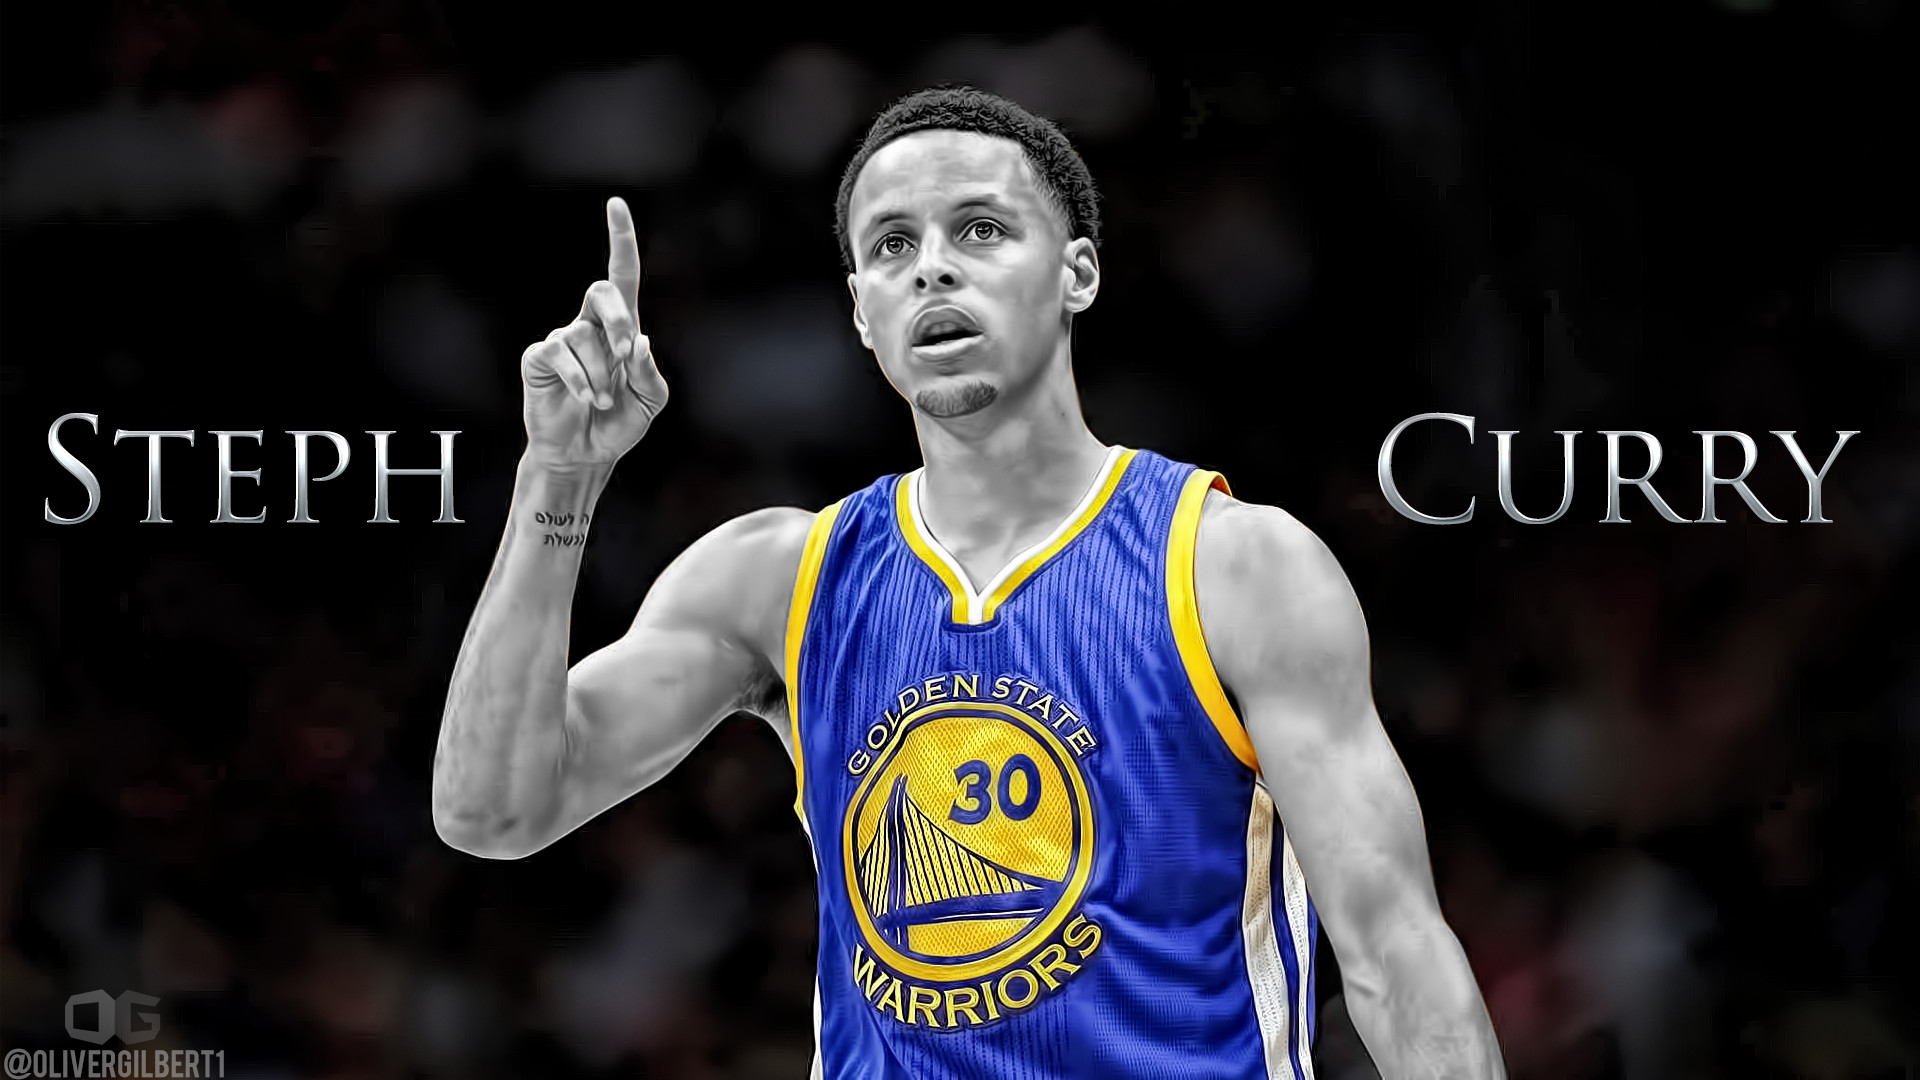 Steph curry wallpaper by hecziaa watch customization wallpaper hdtv